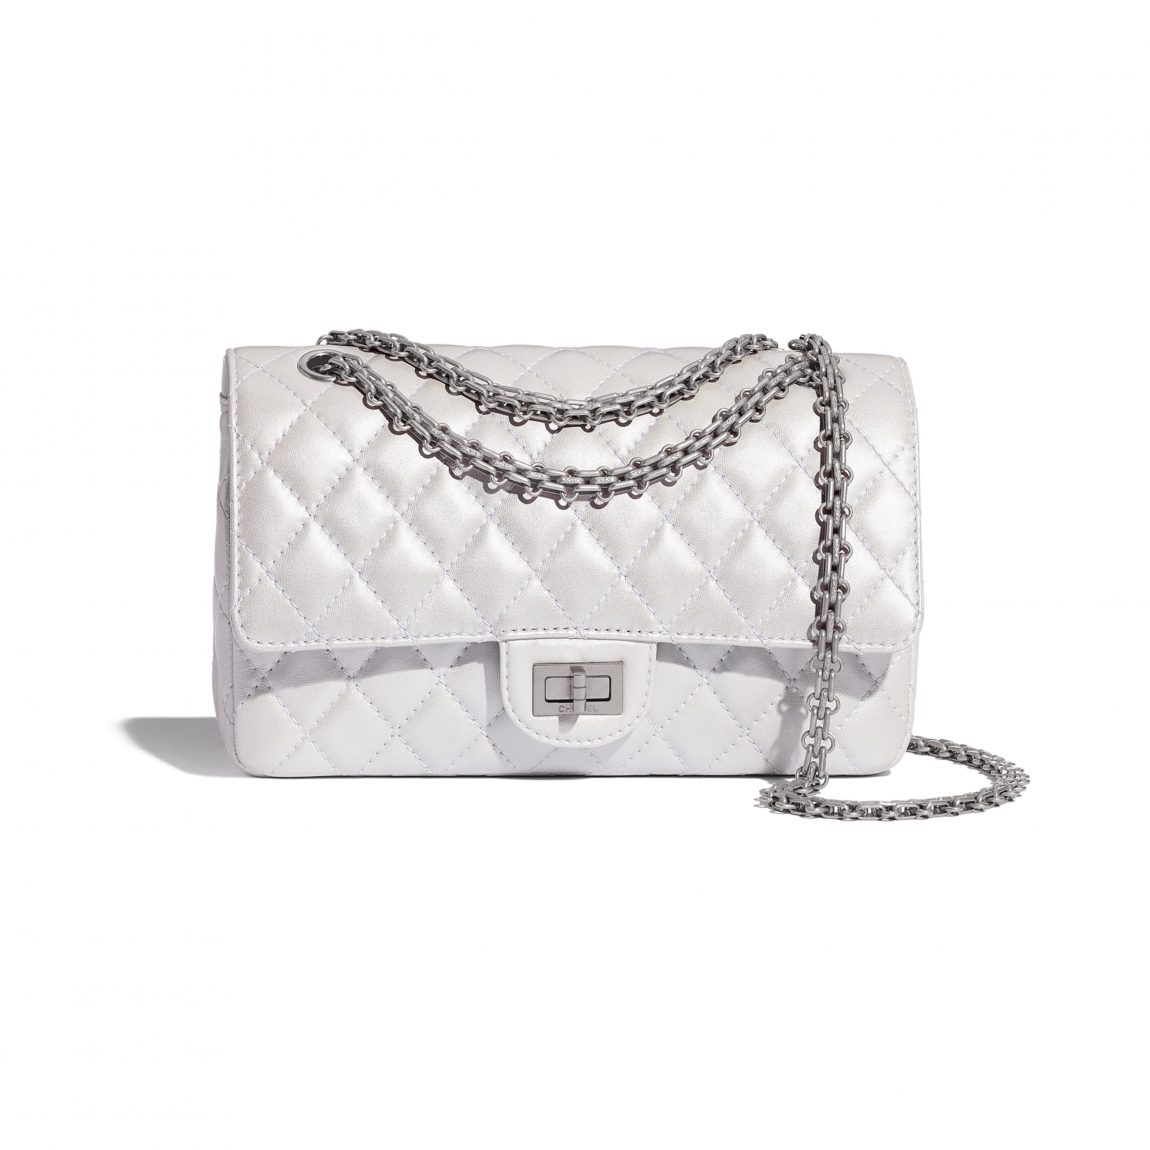 Chanel 2nd Price Increase in the UK Effective Oct 7th | Spotted Fashion